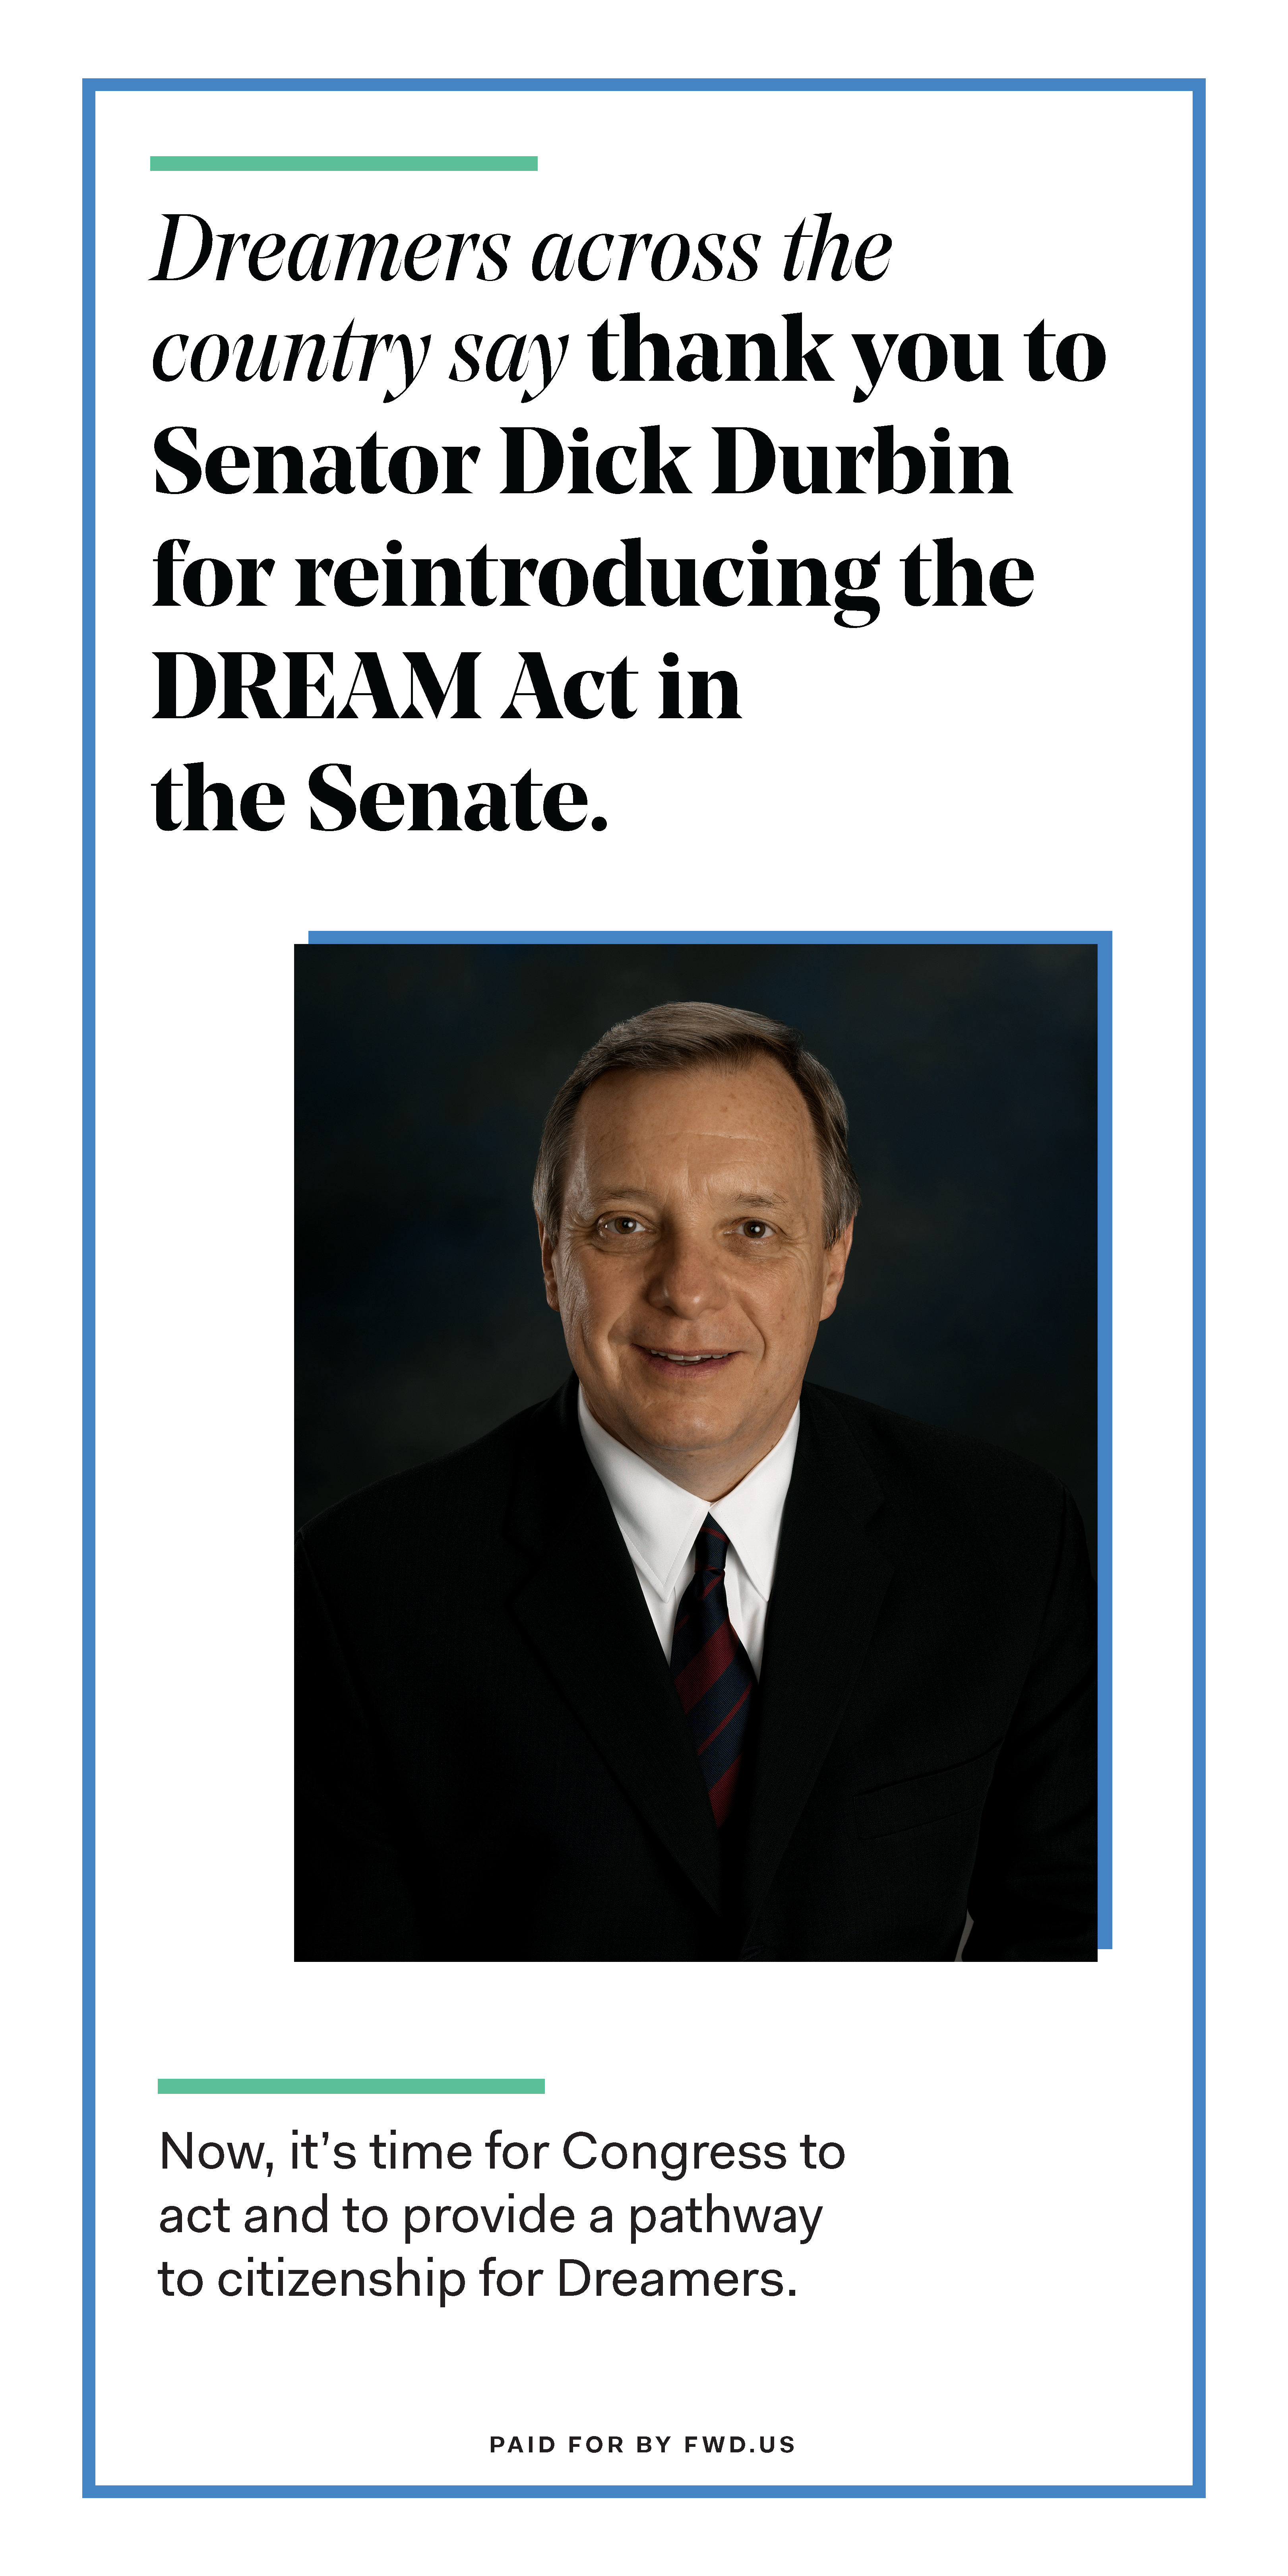 Print ad thanking Senator Durbin for supporting Dreamers. A photo of the Senator is included. 